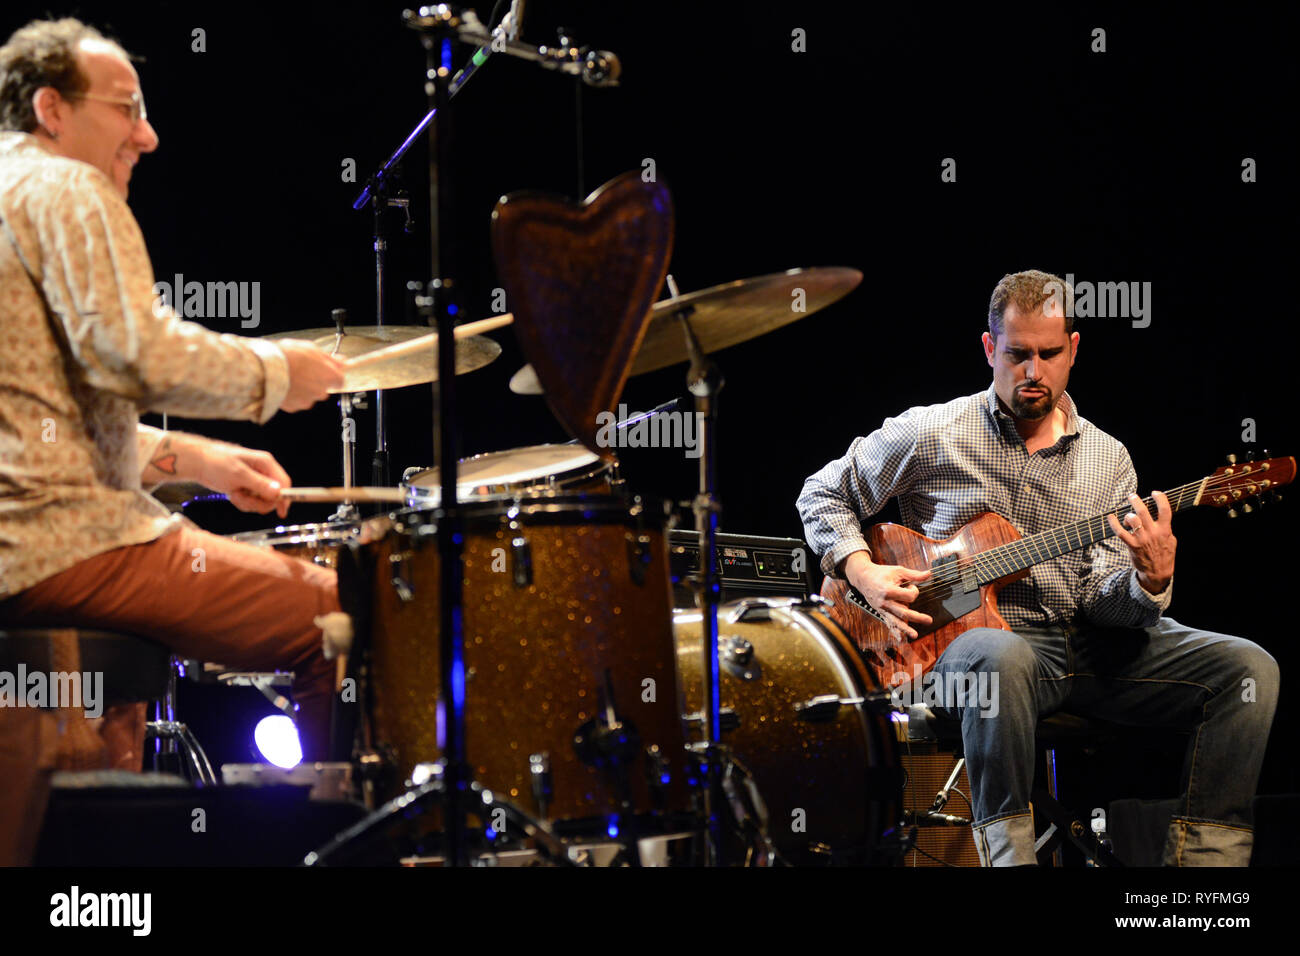 Jazz duo Charlie Hunter (guitar) and Scott Amendola (drums) playing live in concert Stock Photo